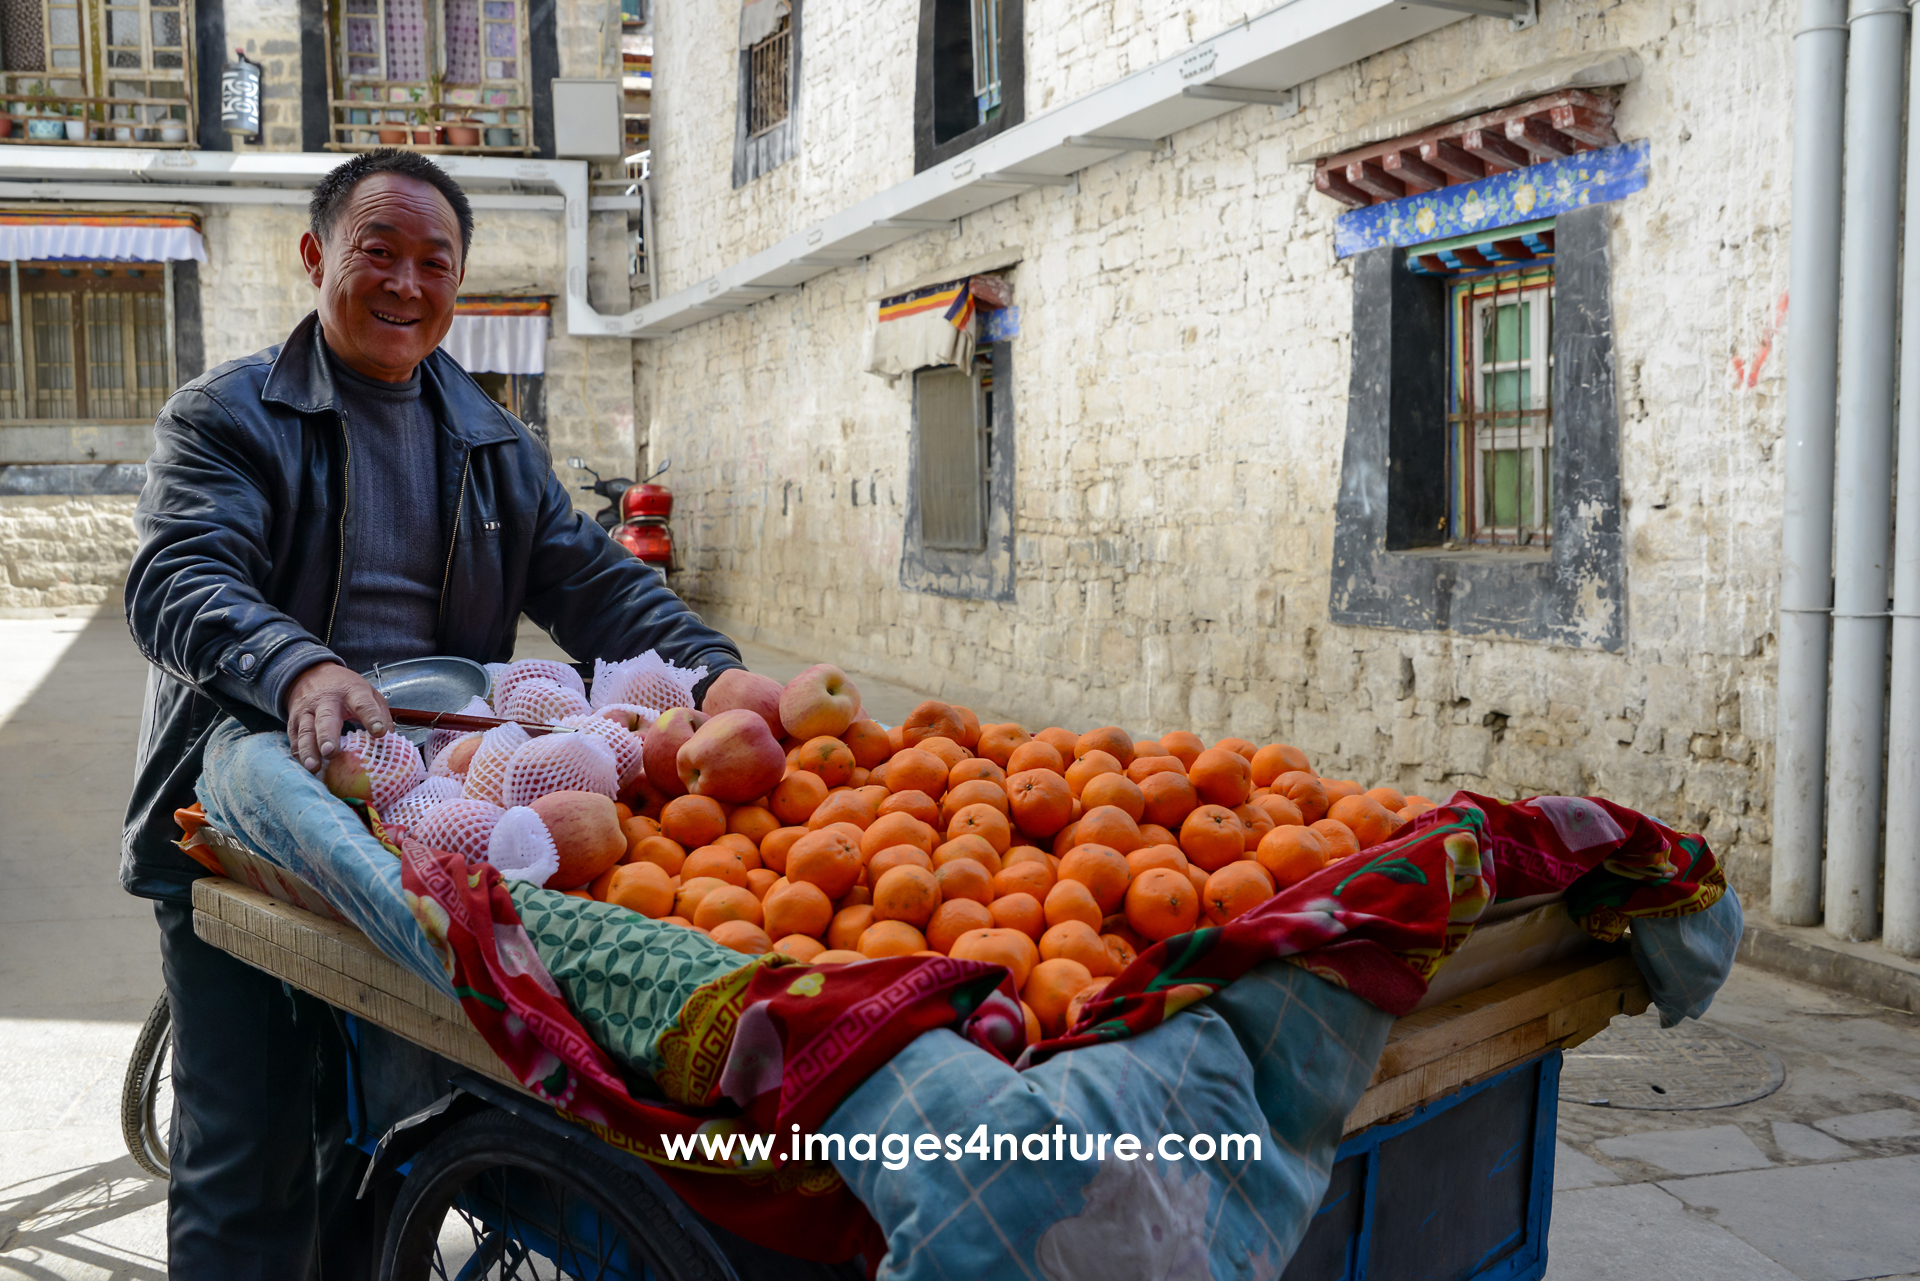 Portrait of a friendly smiling fruit vendor with his cart filled with citrus fruit and apples